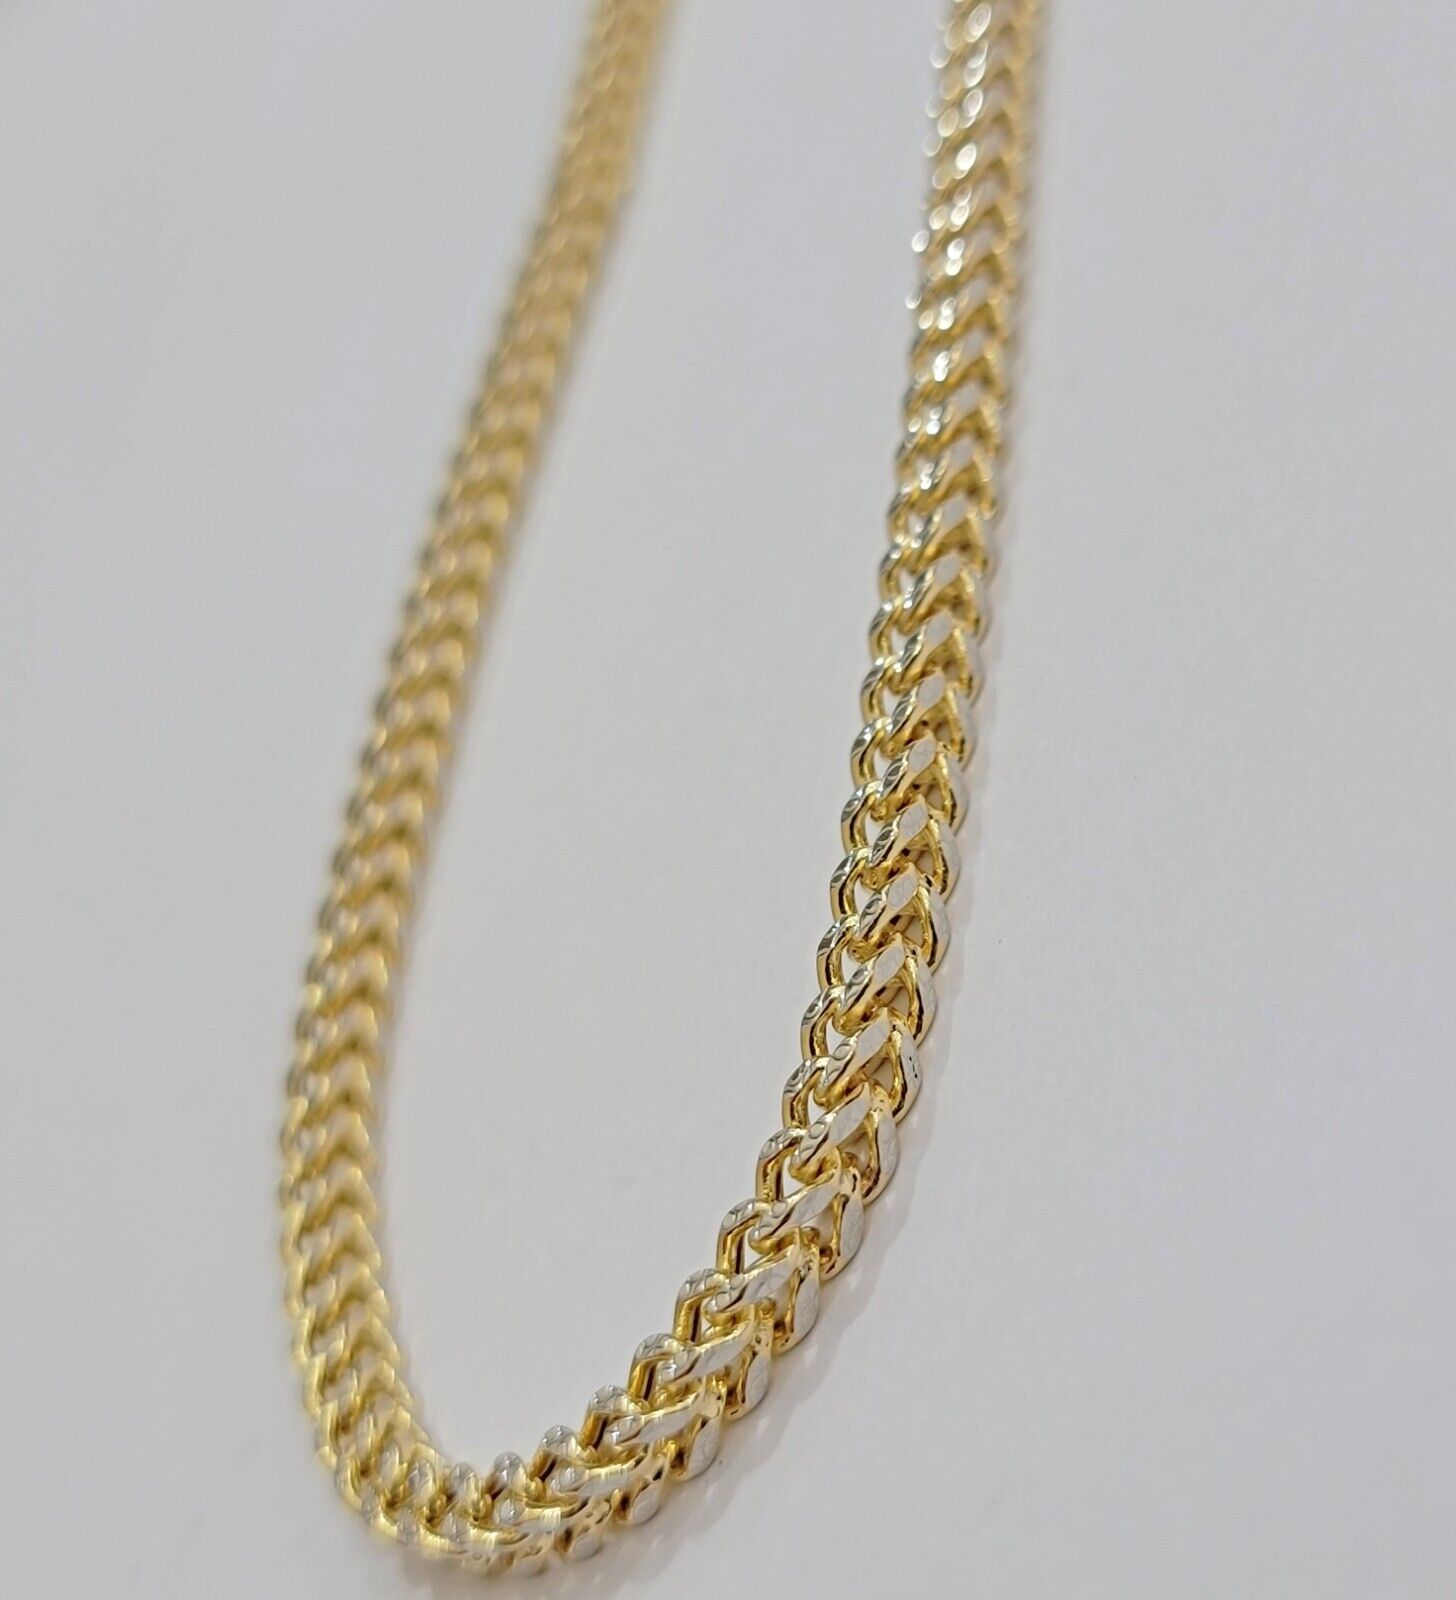 Real 14k Gold Chain Franco 3.5mm Necklace Diamond cut 20